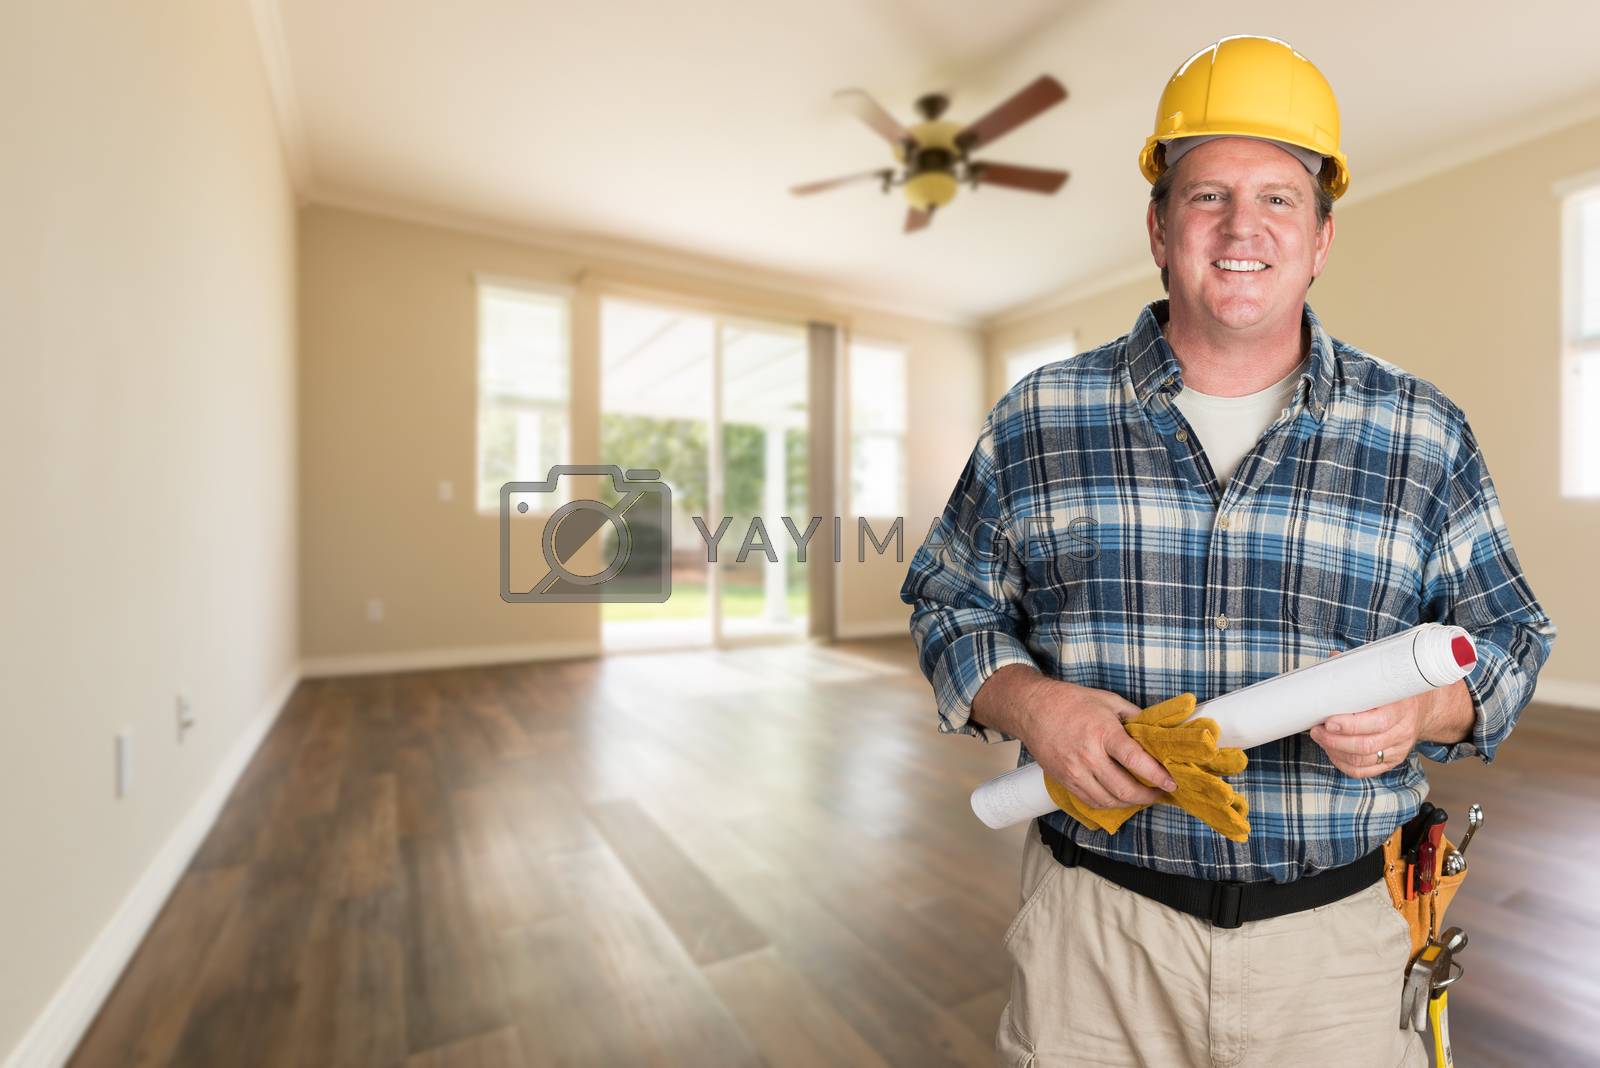 Royalty free image of Contractor With Plans and Hard Hat Inside Empty Room with Wood Floors. by Feverpitched